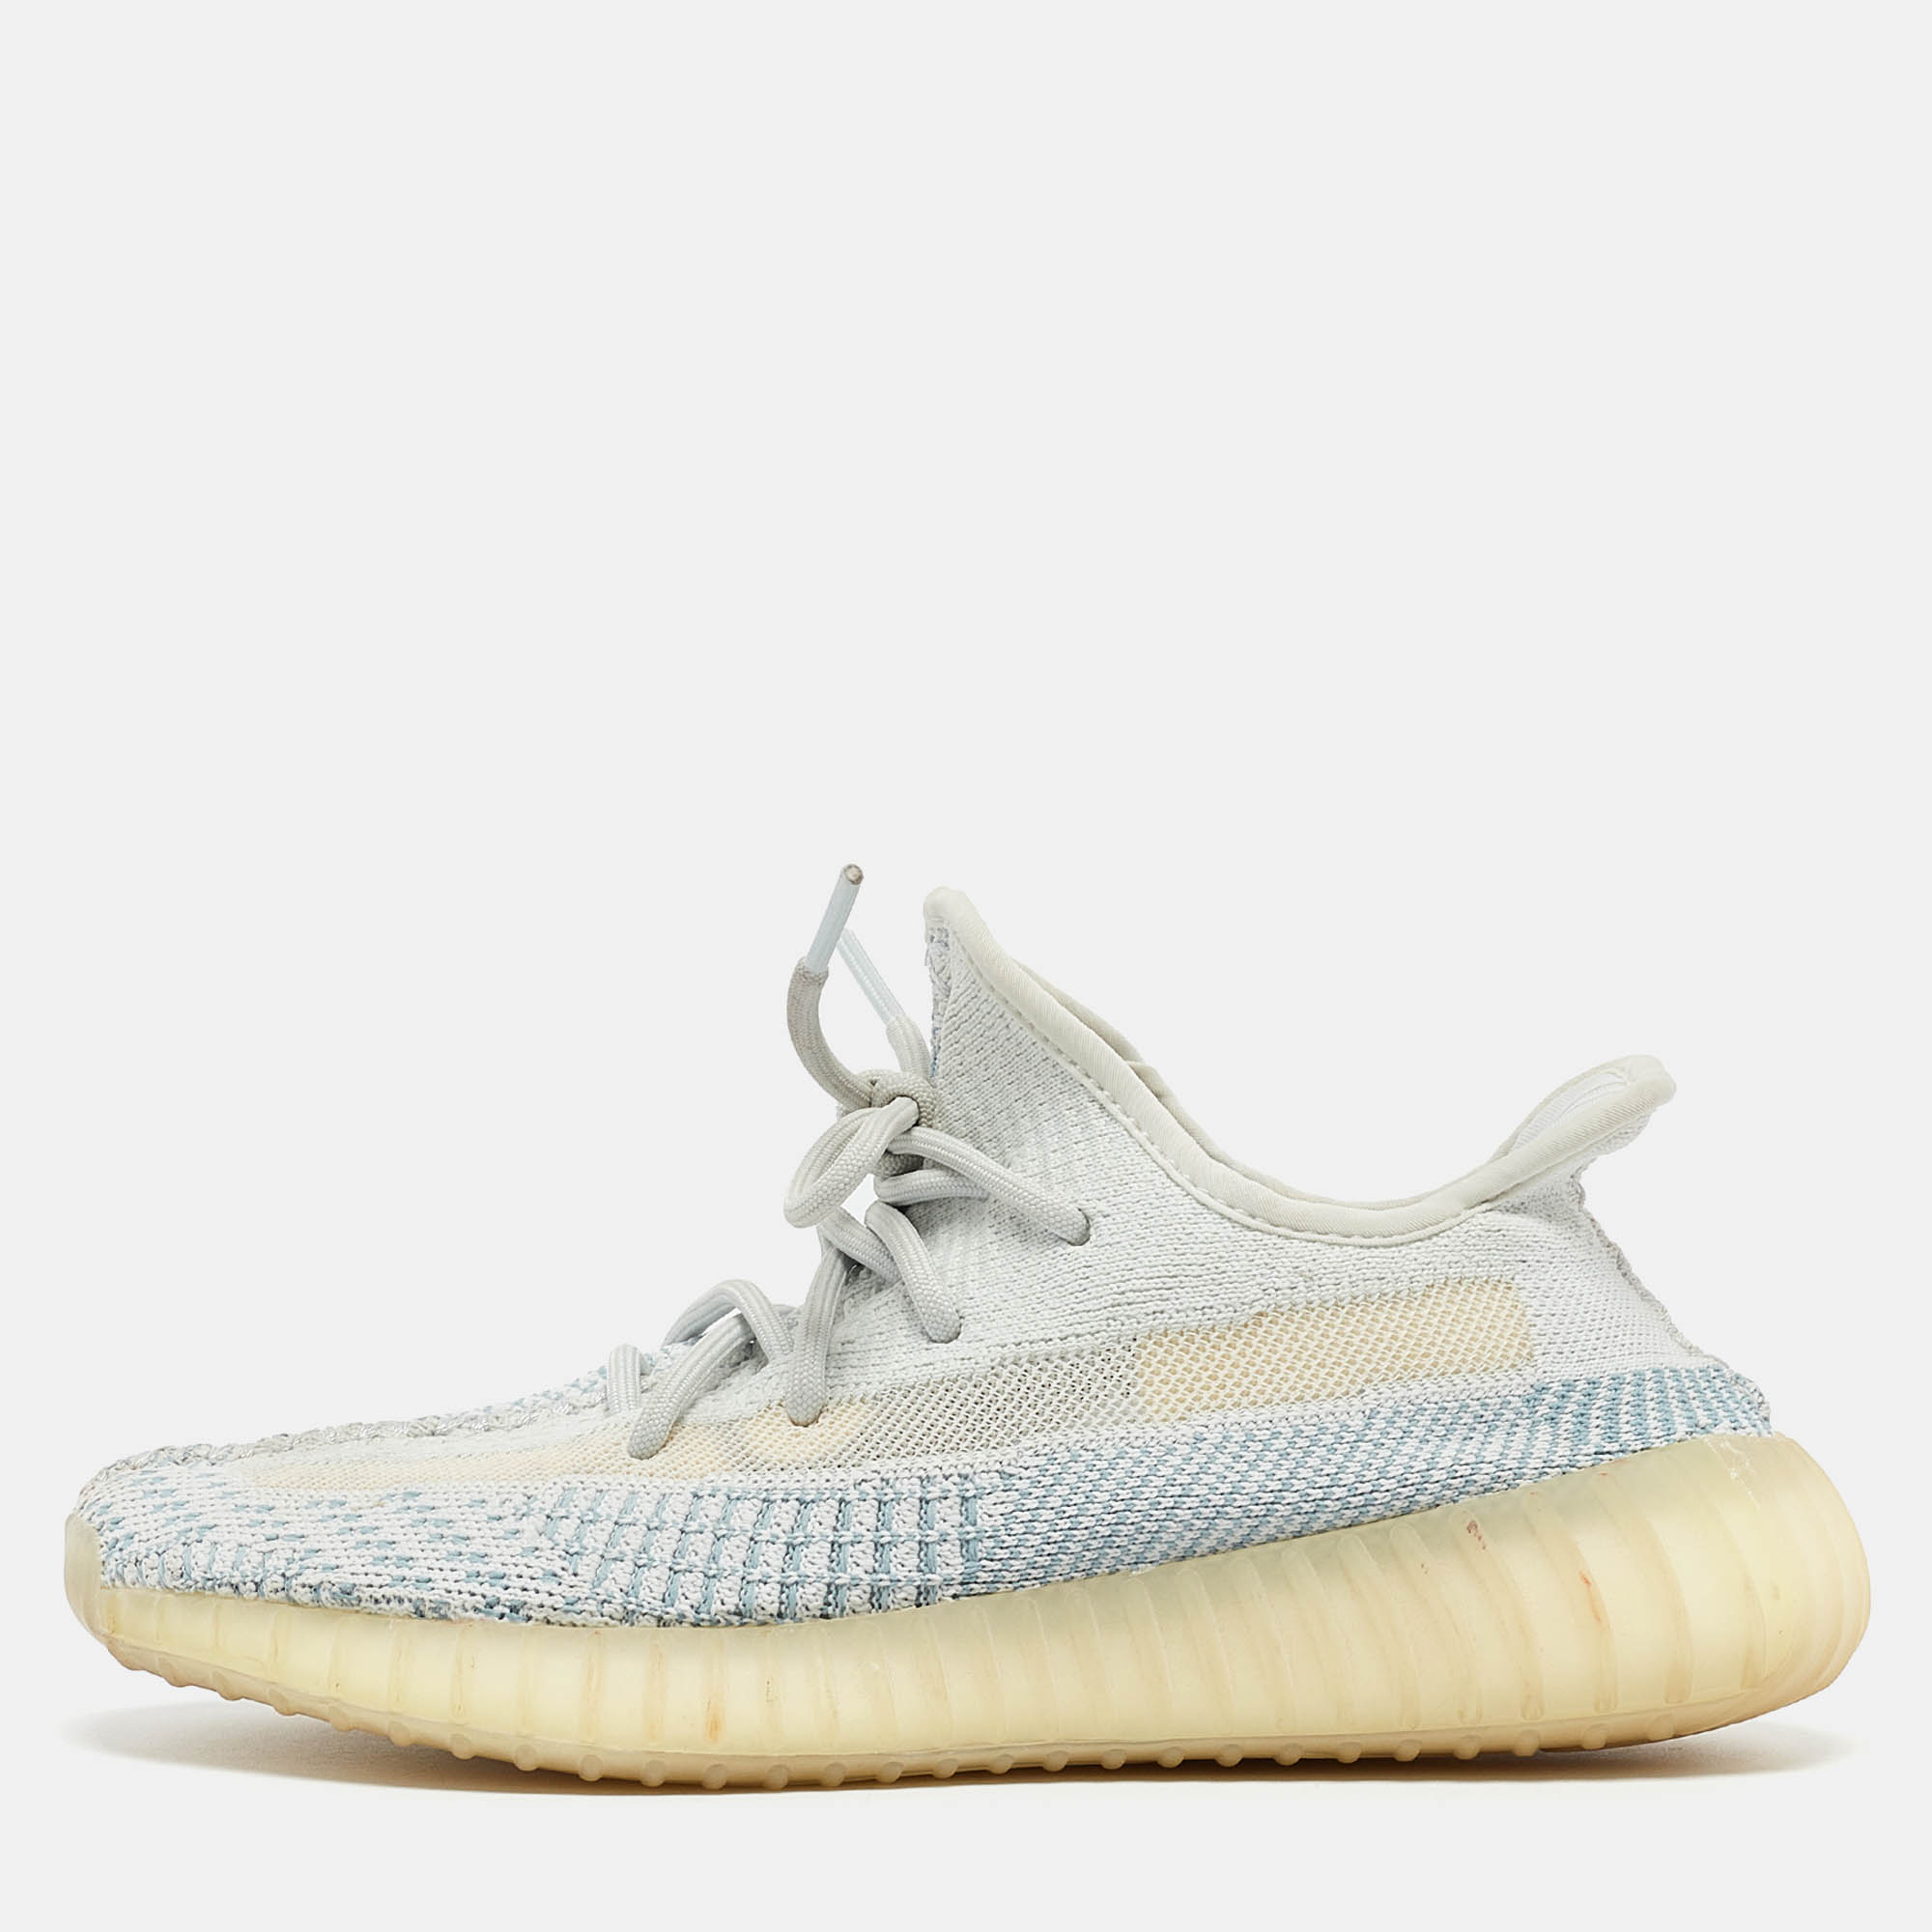 

Yeezy x Adidas Blue Knit Fabric Boost 350 V2 Cloud White Non Reflective Sneakers Size 38 2/3